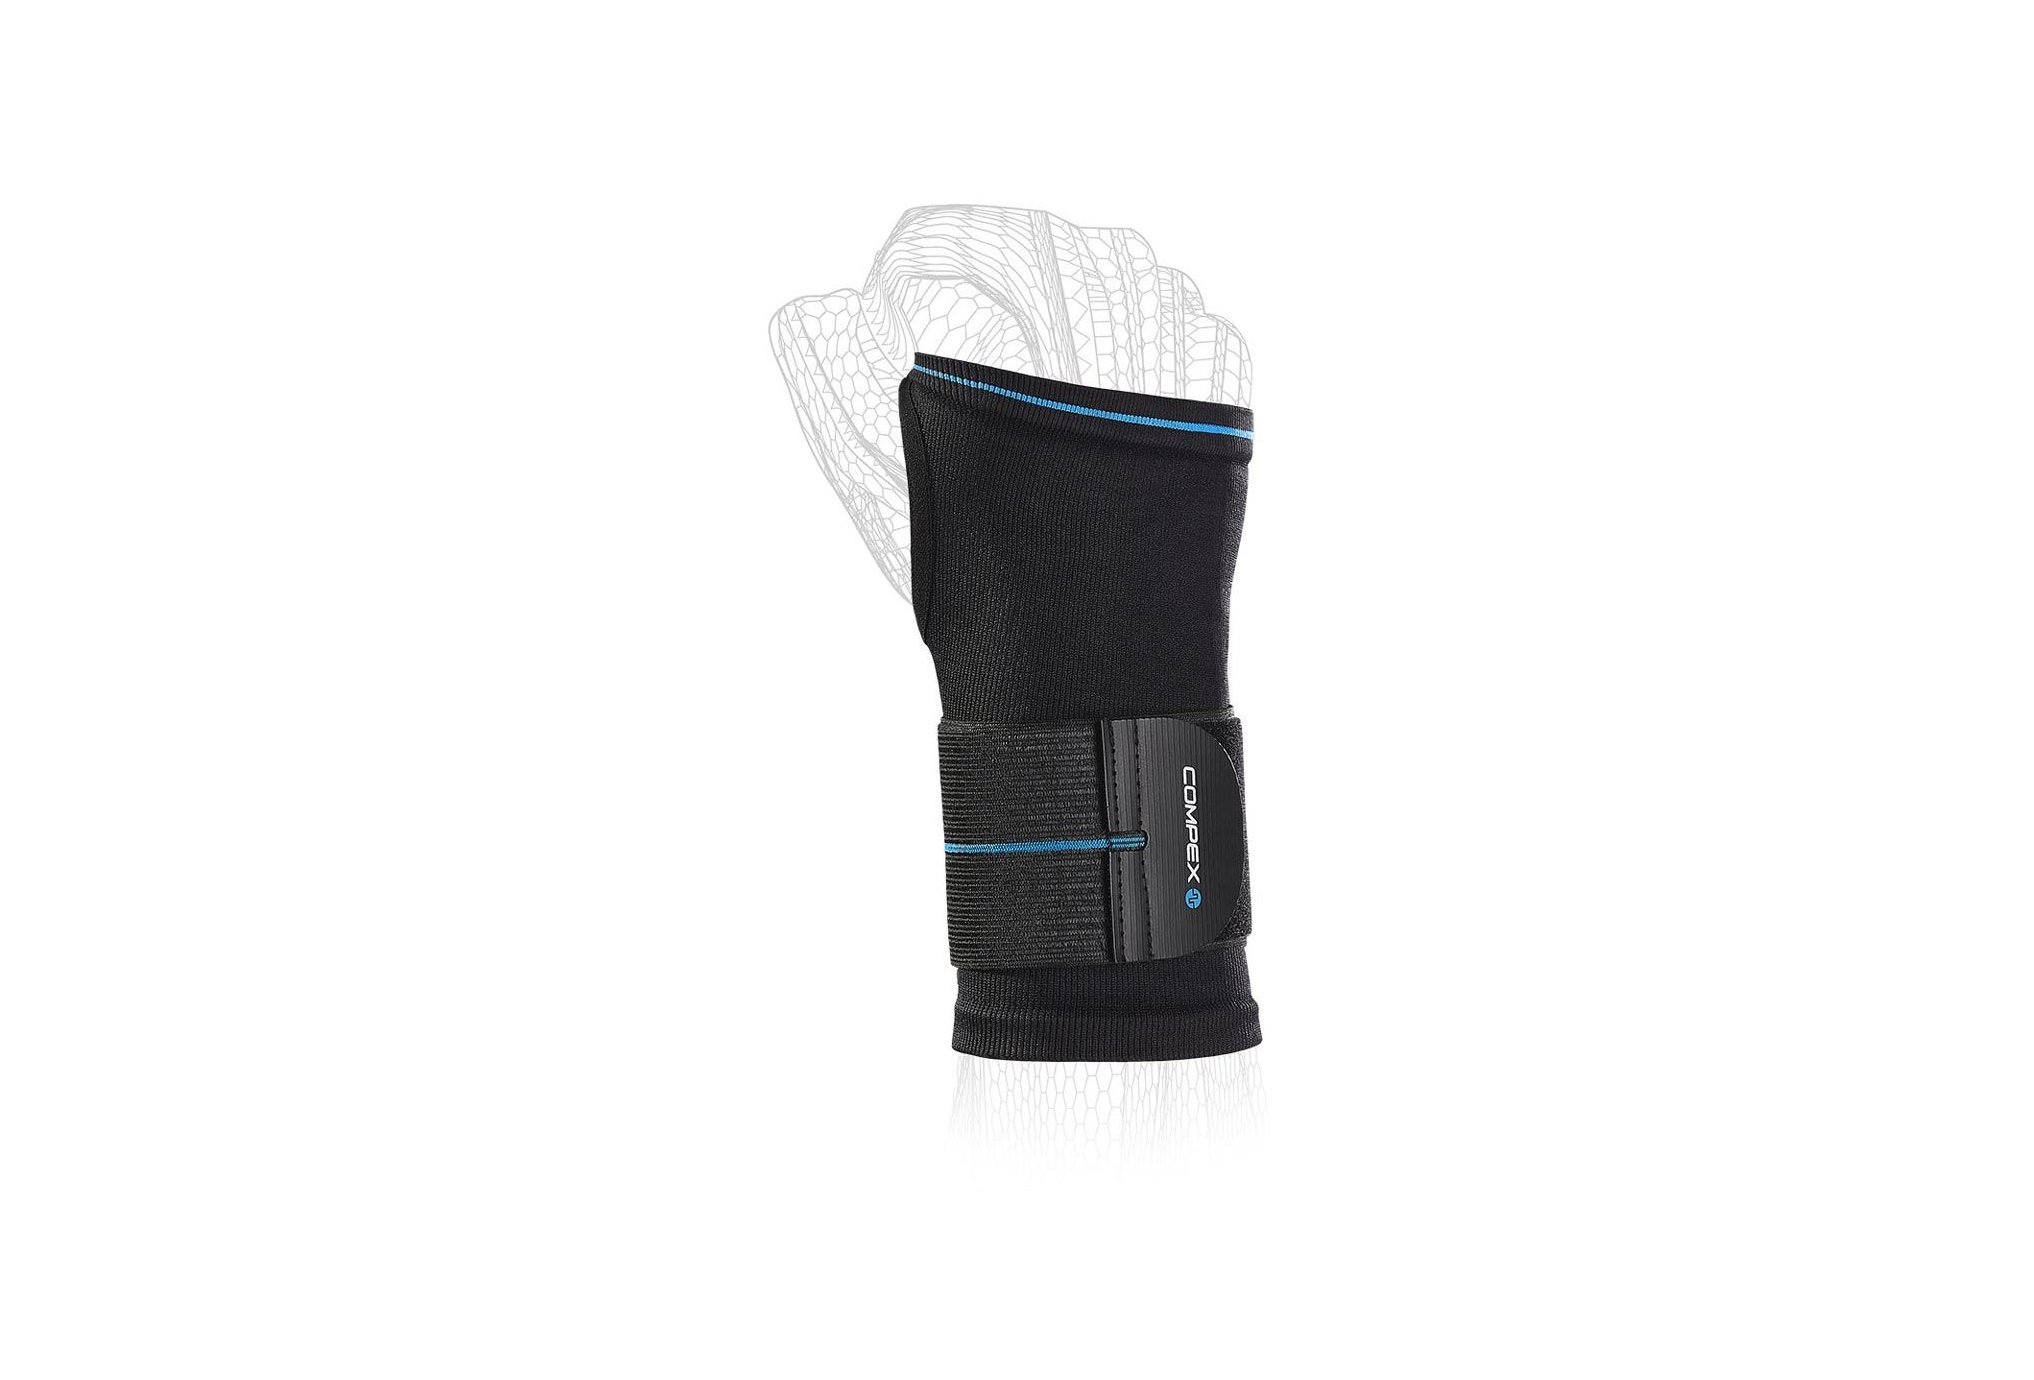 Compex Activ Wrist+ Protection musculaire & articulaire